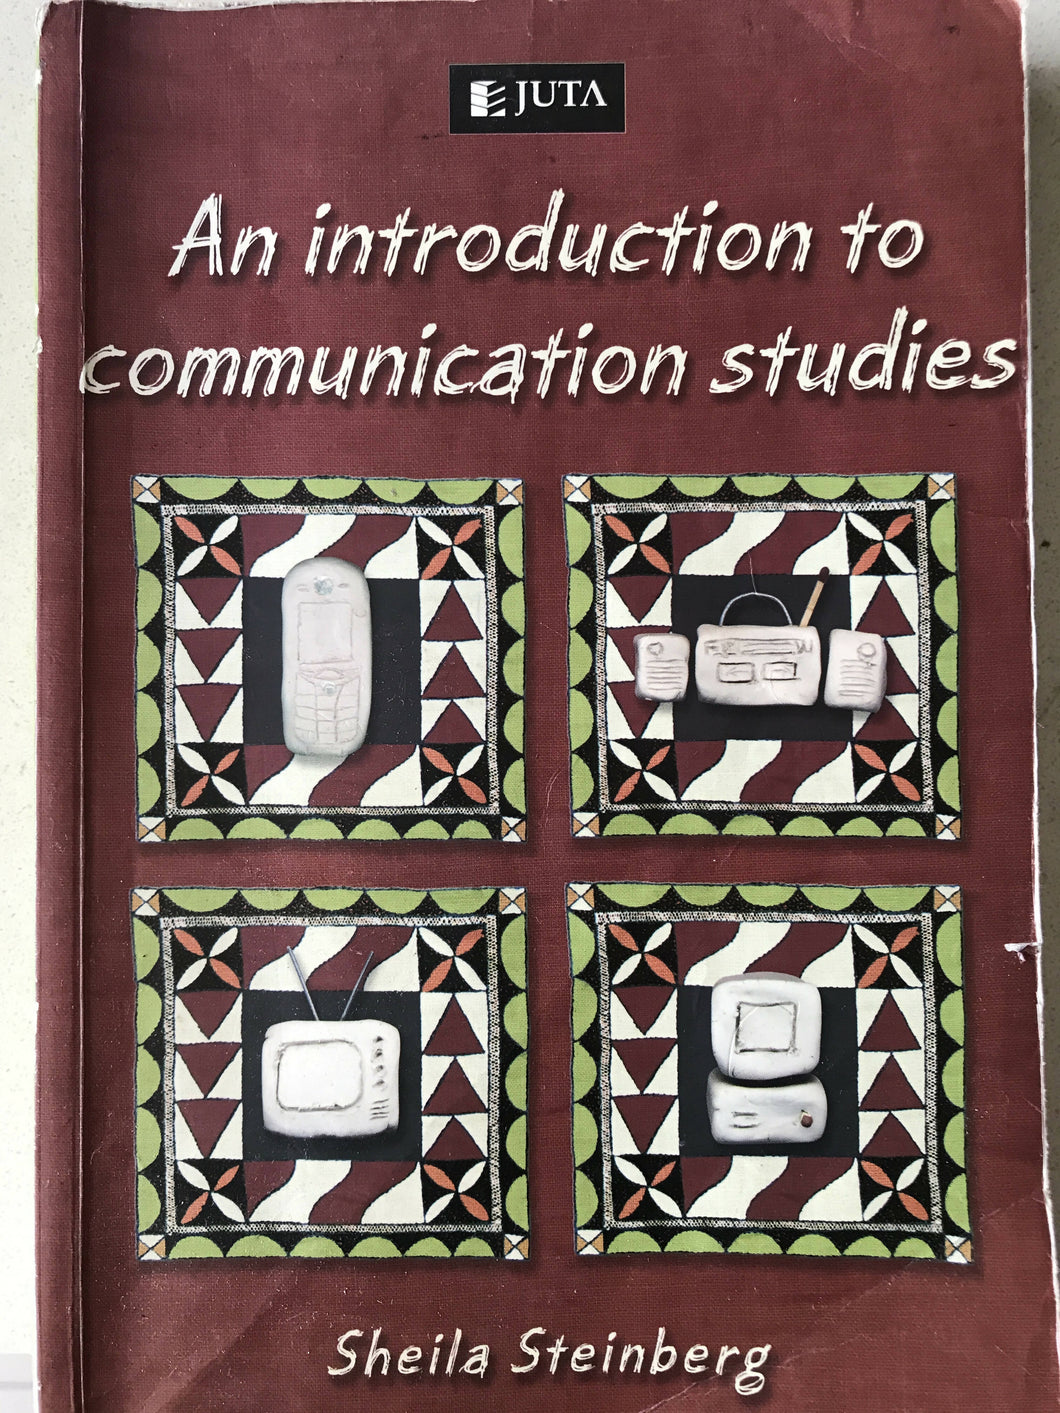 An introduction to communication studies